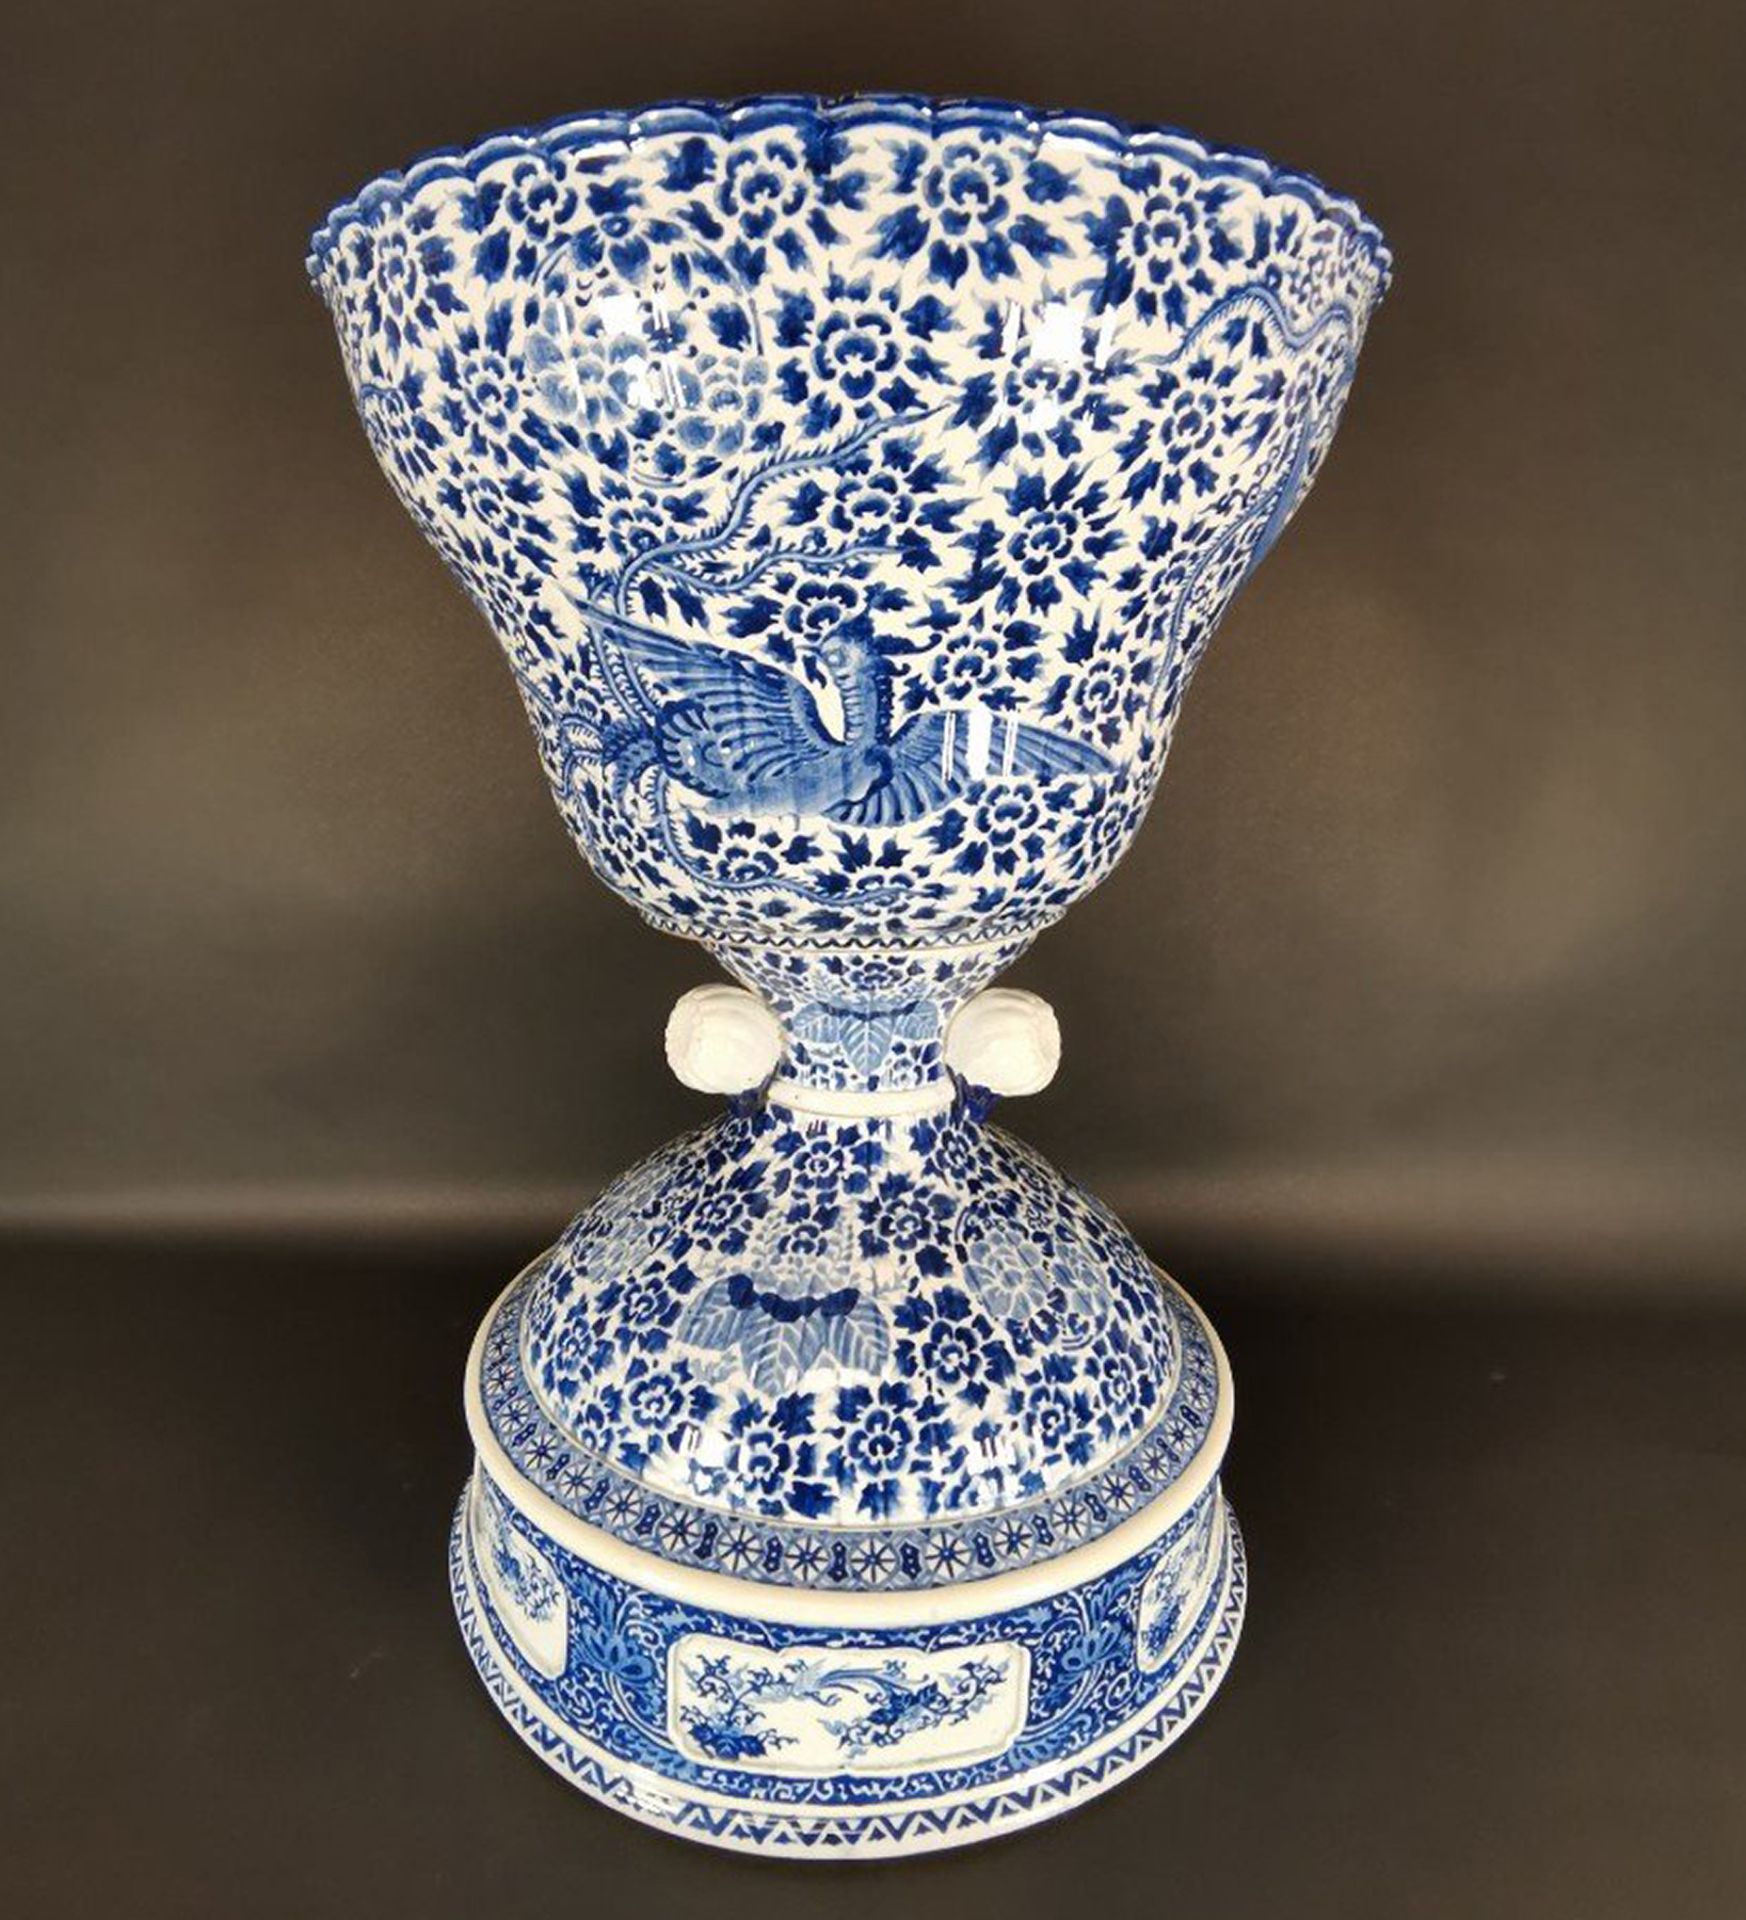 LARGE 19TH CENTURY VASE IN CHINESE PORCELAIN